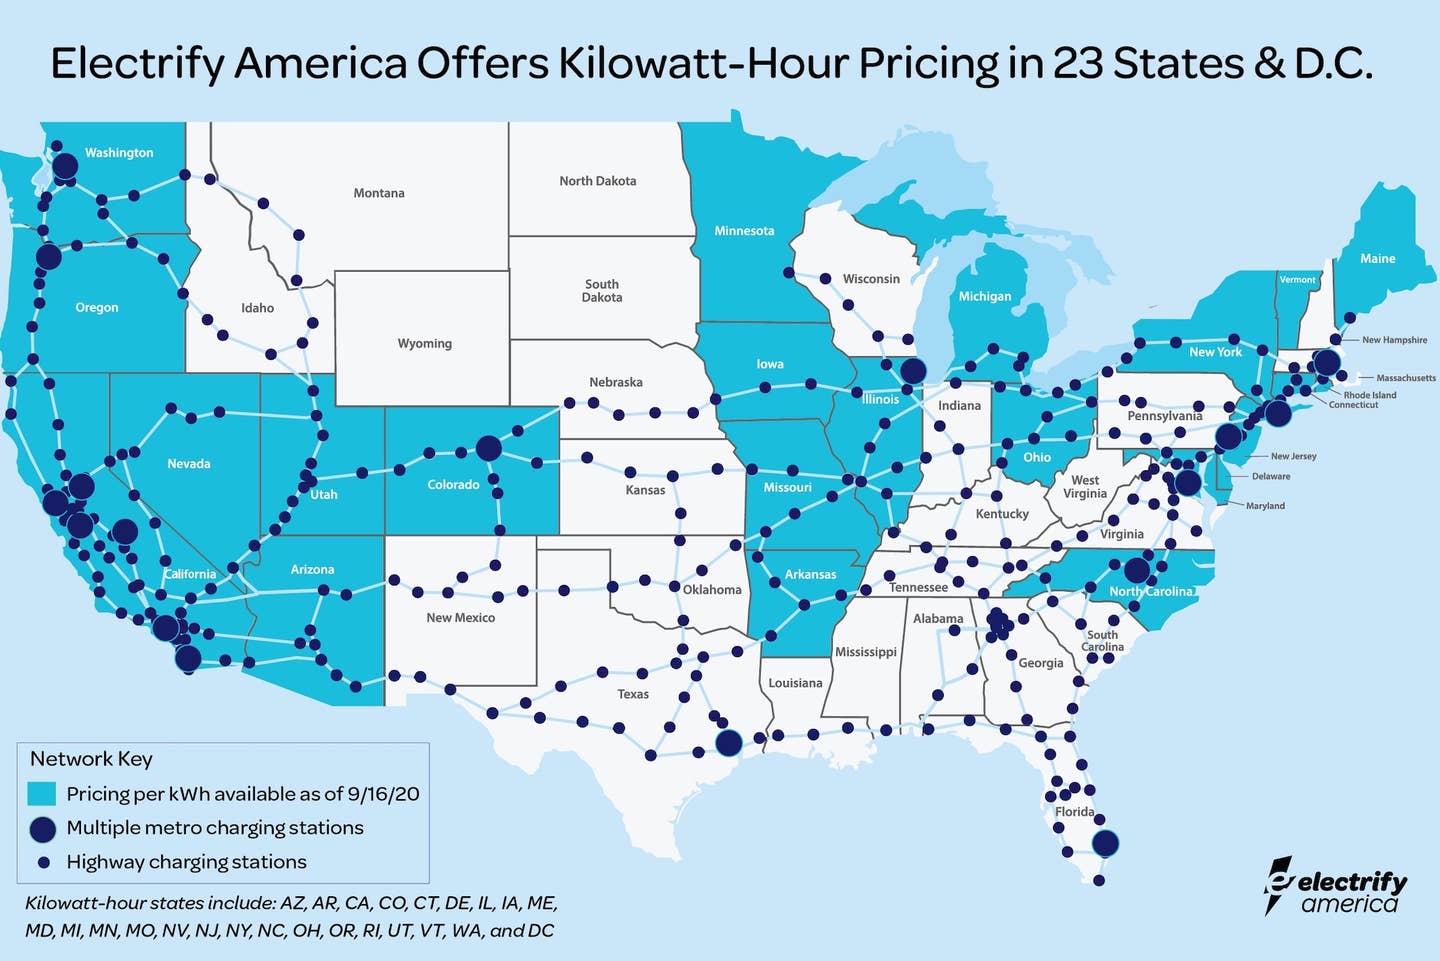 message-editor%2F1600712108531-electrify-america-introduces-new-pricing-structure-featuring-kilowatt-hour-pricing-in-23-states-and-district-of-columbia--reduced-rates-for-states-with-minute-based-pricing-537.jpg